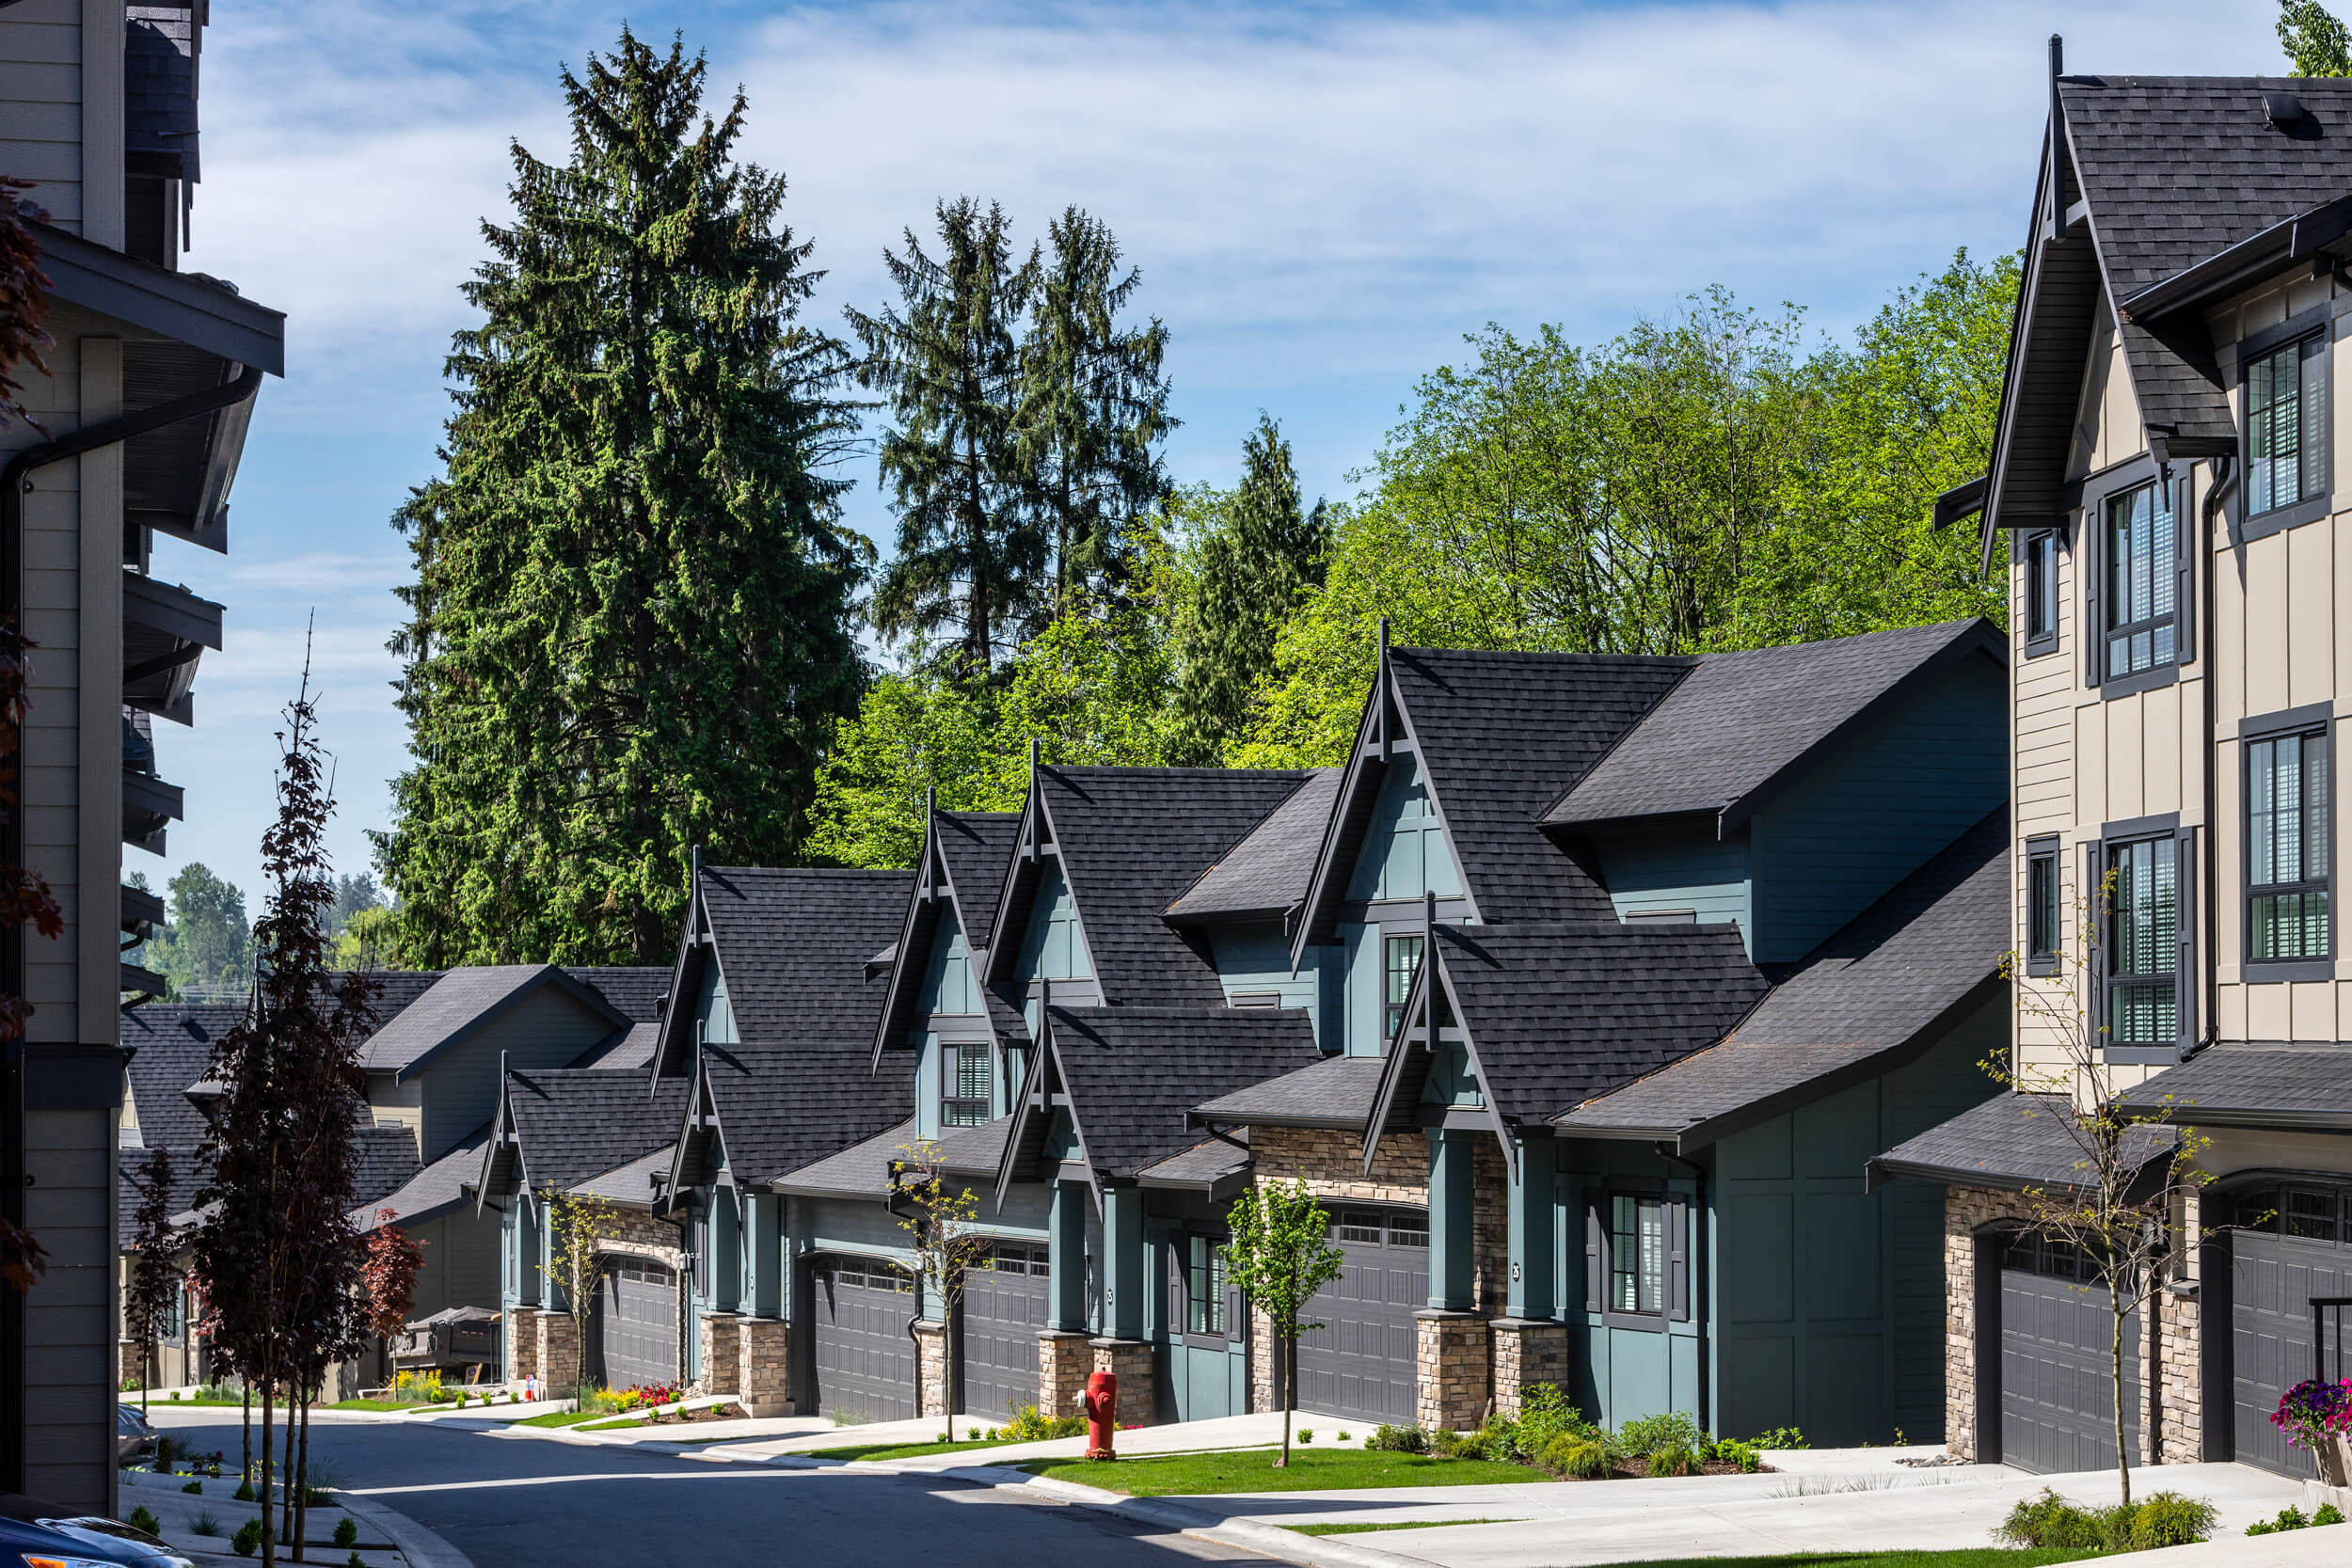 The “The Links” development is a residential townhouse project in Surrey; The Links Residences has 55 units. Design by Group 161 | Atelier Pacific Architecture.